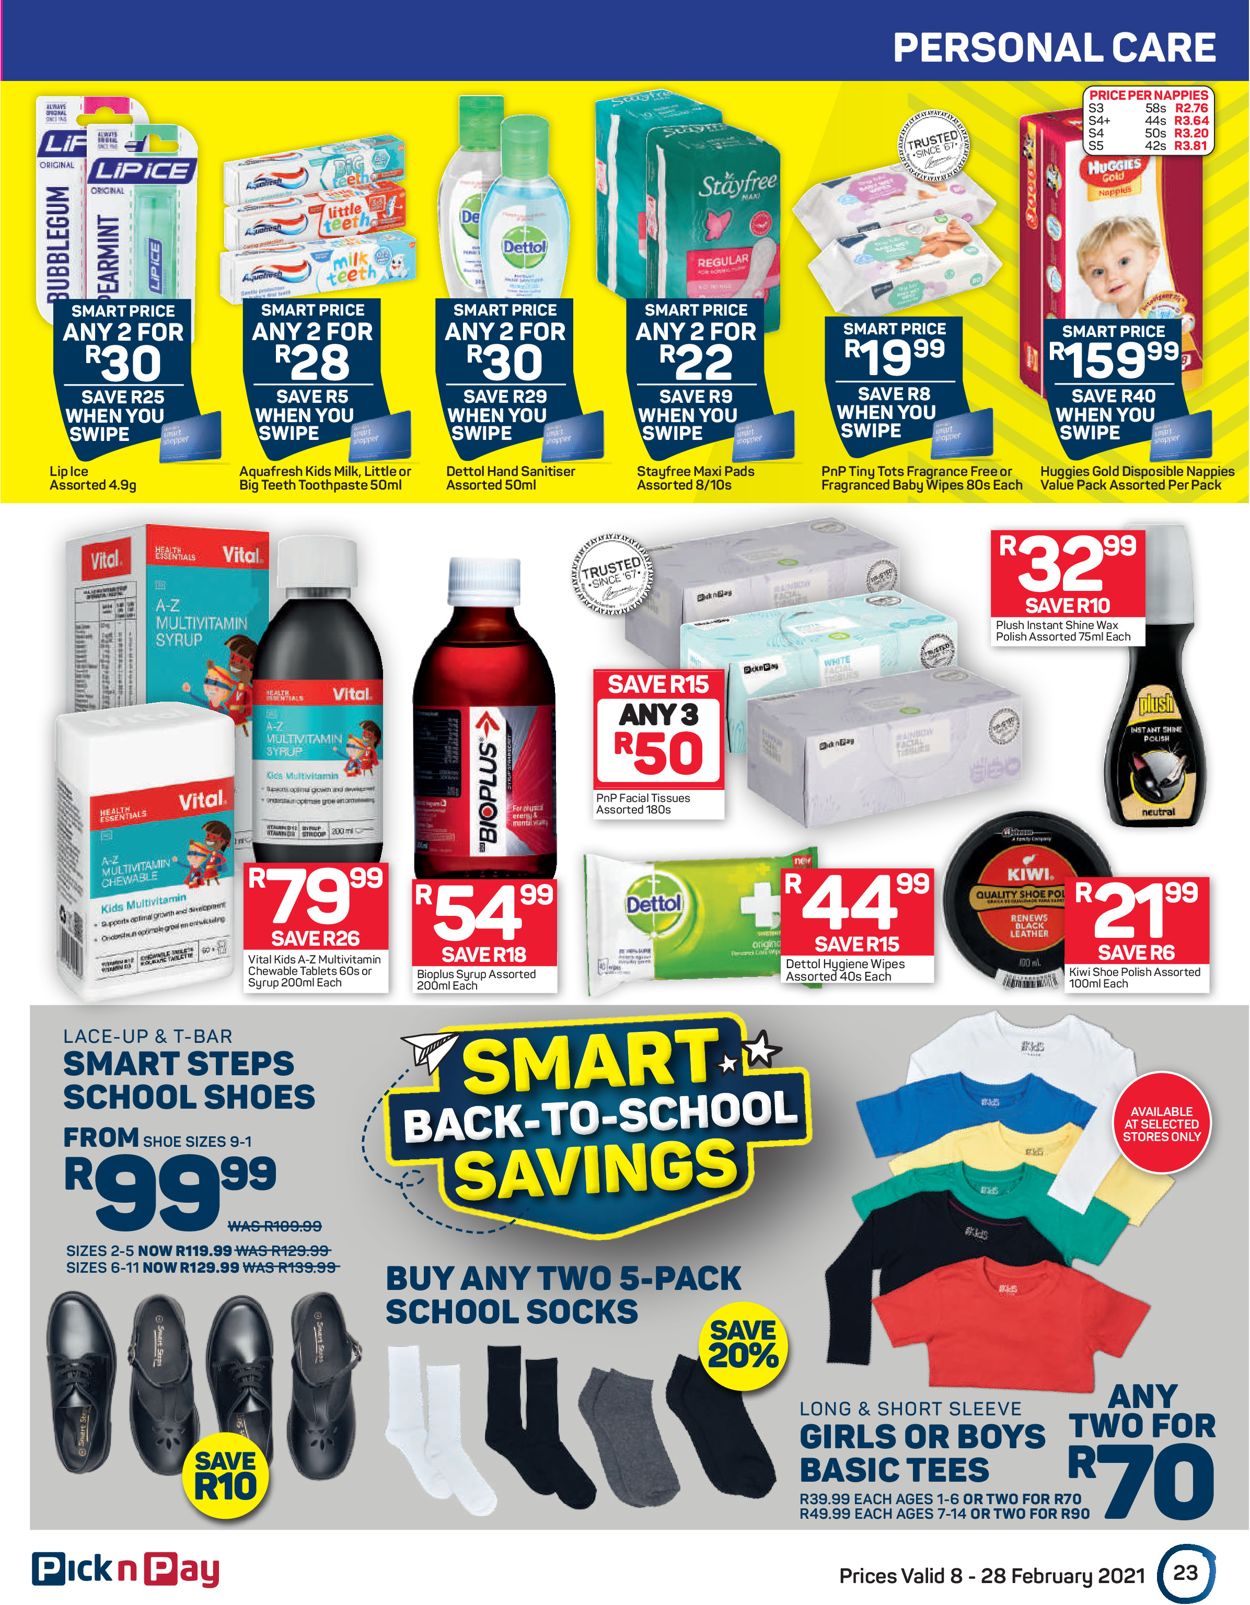 Pick n Pay Back to School 2021 Catalogue - 2021/02/08-2021/02/28 (Page 23)